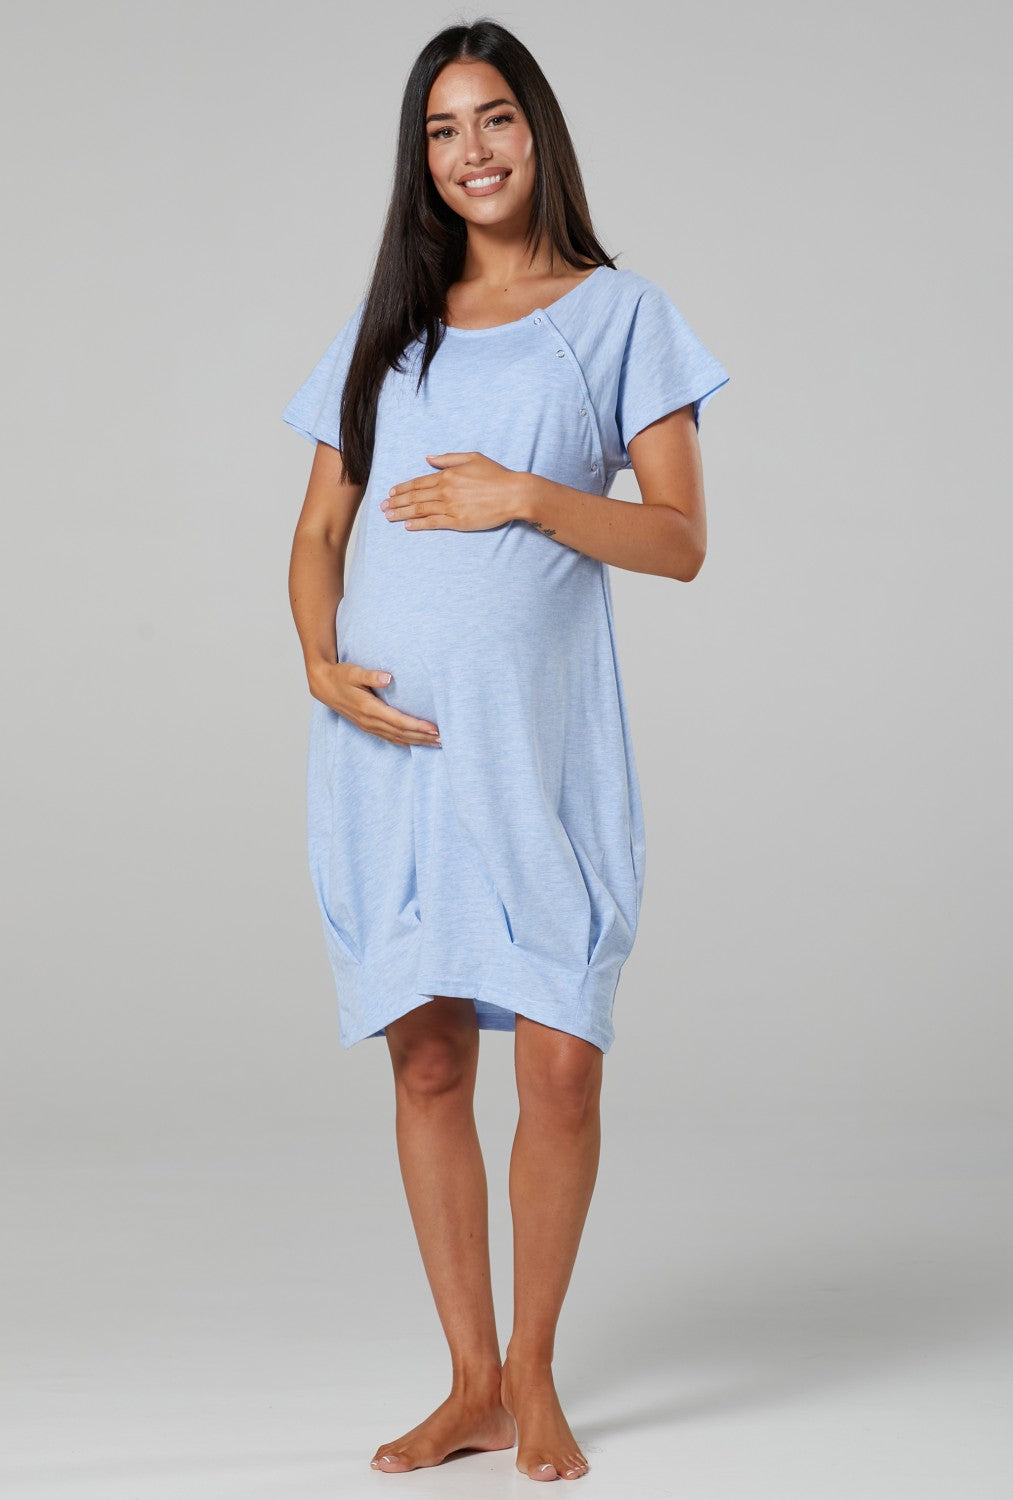 Labor and Delivery Hospital Gown Maternity Gown Nursing Gown Dress